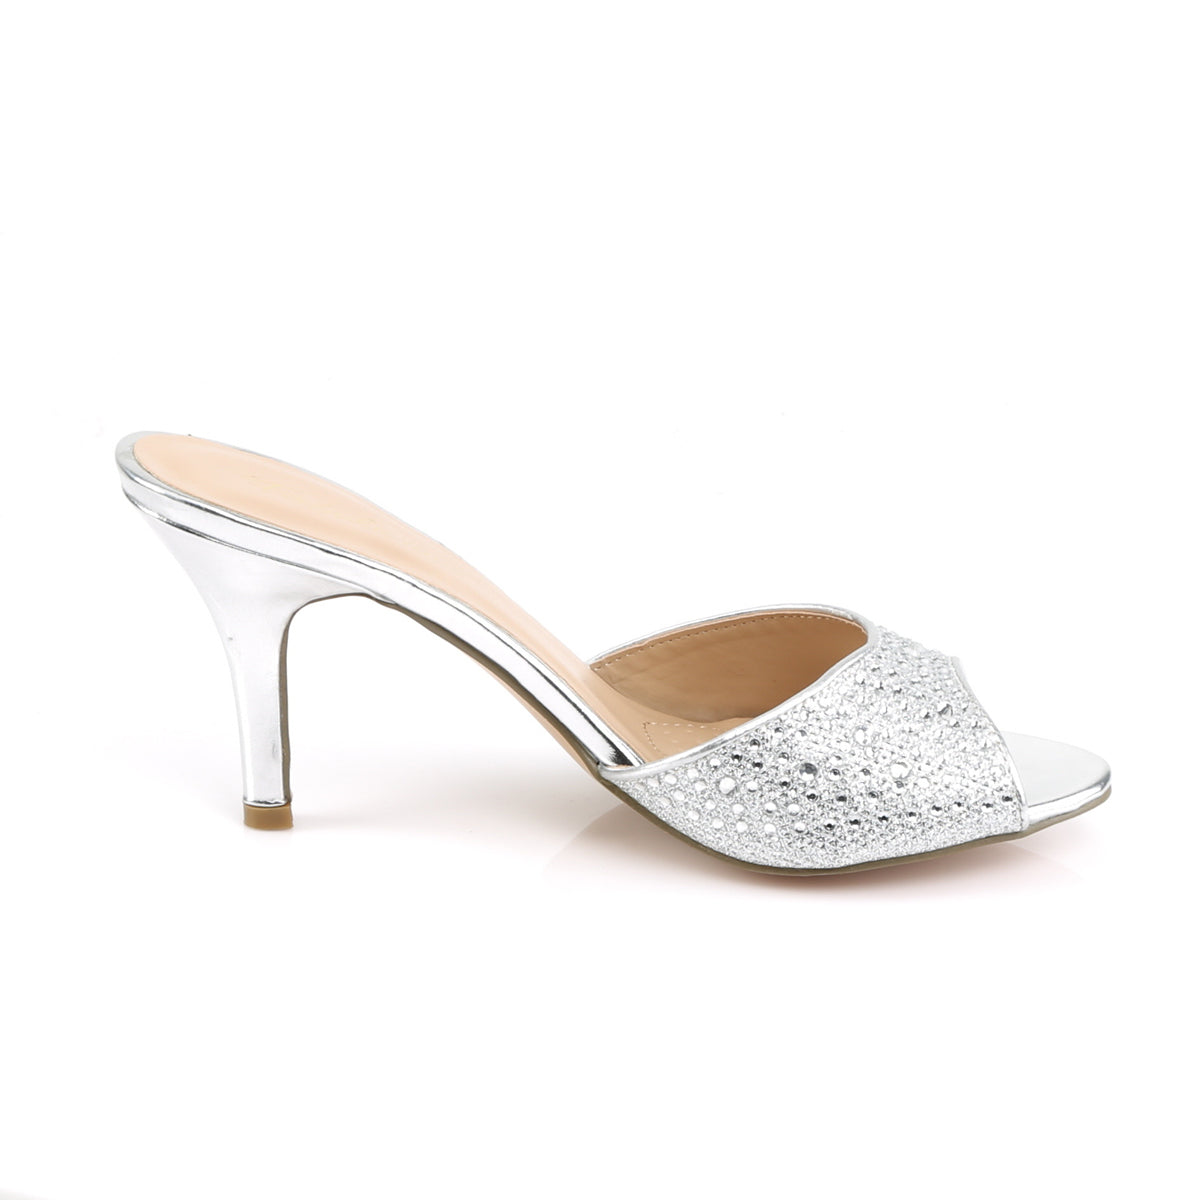 LUCY-01 Fabulicious Silver Glitter Mesh Fabric Shoes [Sexy Shoes]